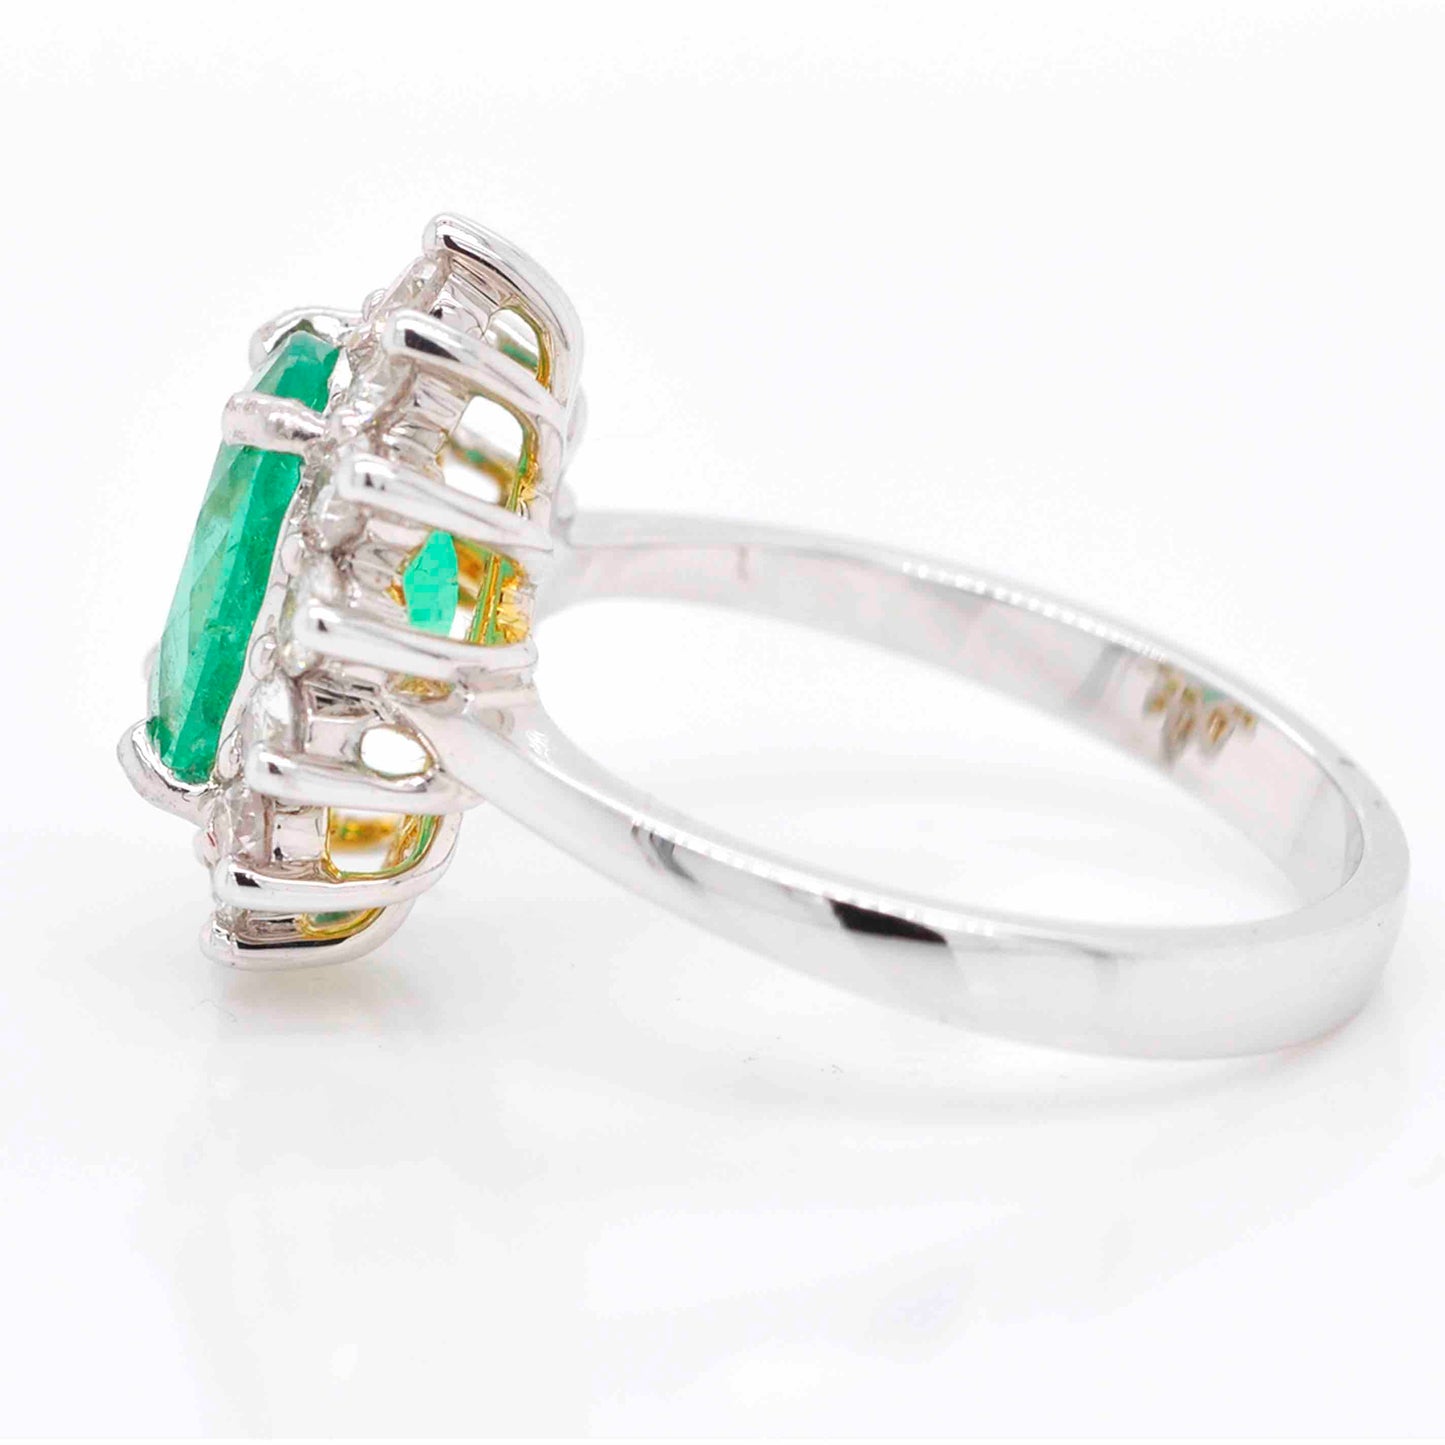 Luxurious Emerald Diamond Ring featuring a natural Columbian oval emerald